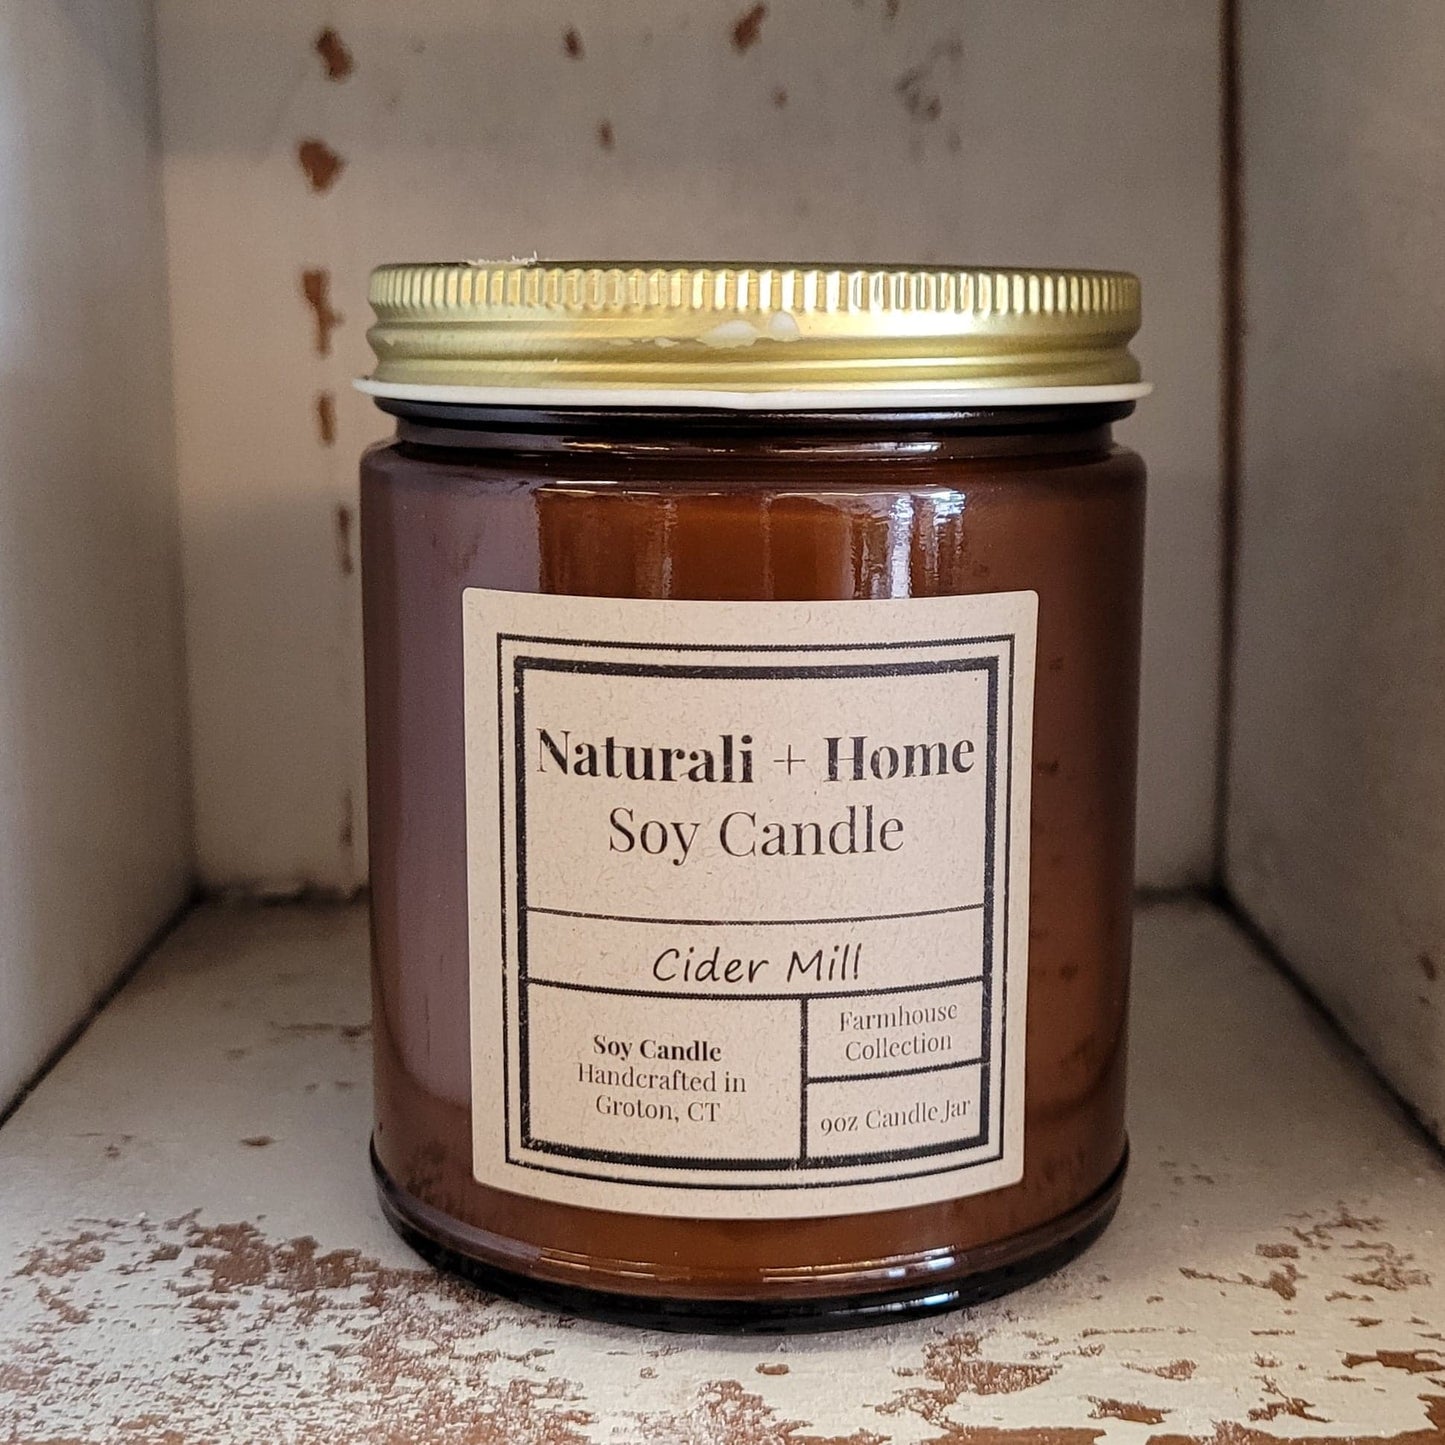 Cider Mill Soy Candle - Naturali Home